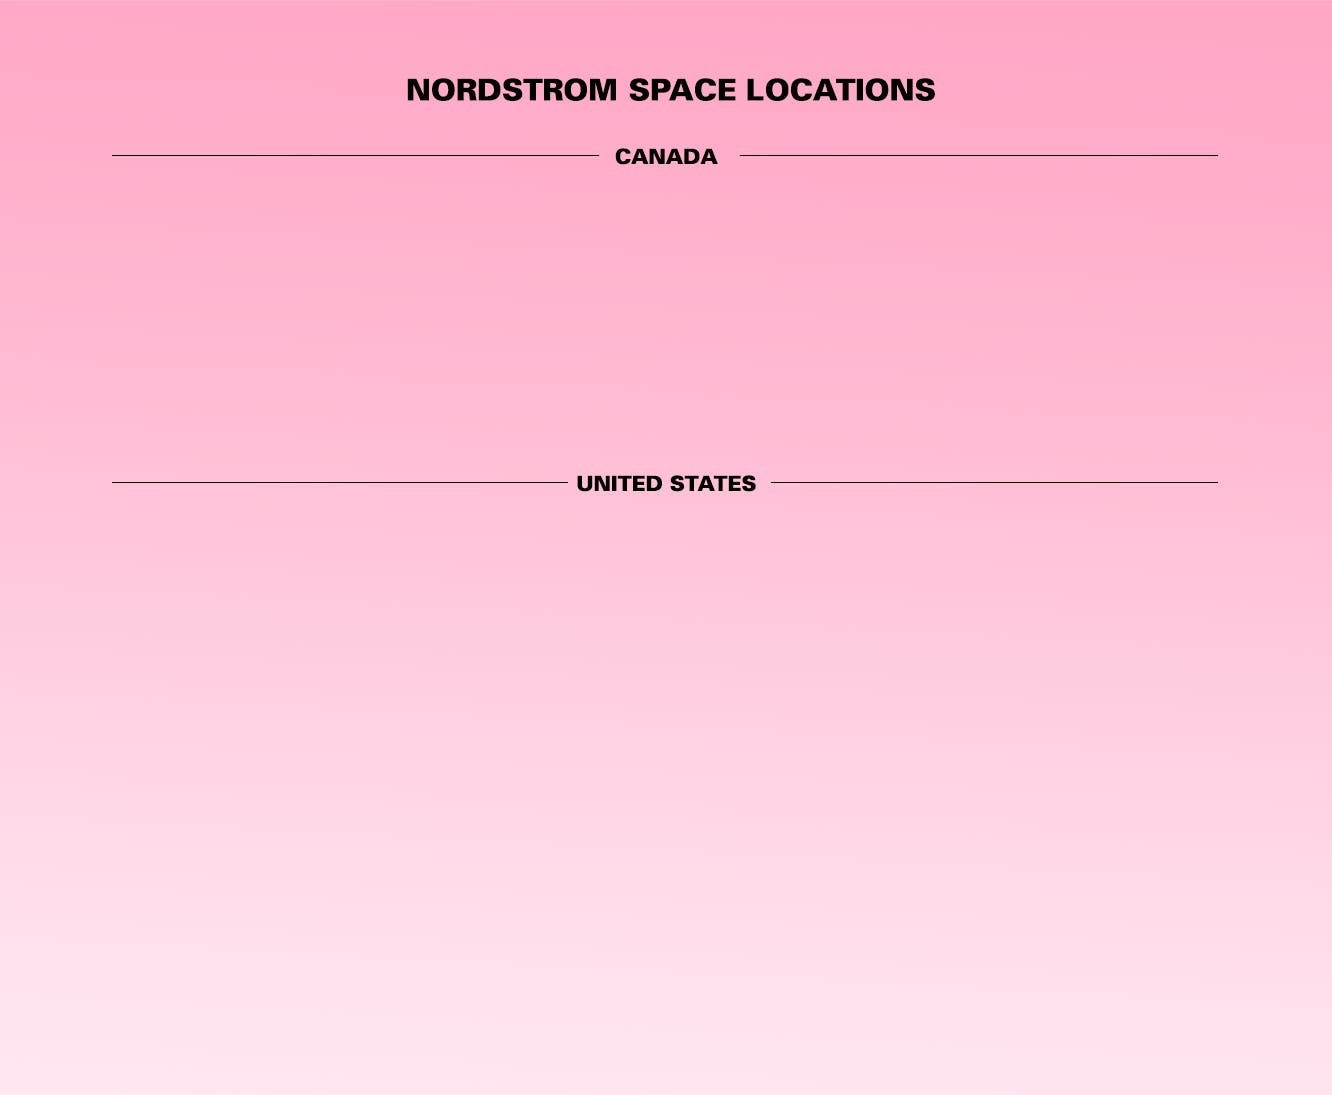 Nordstrom SPACE Canada locations.